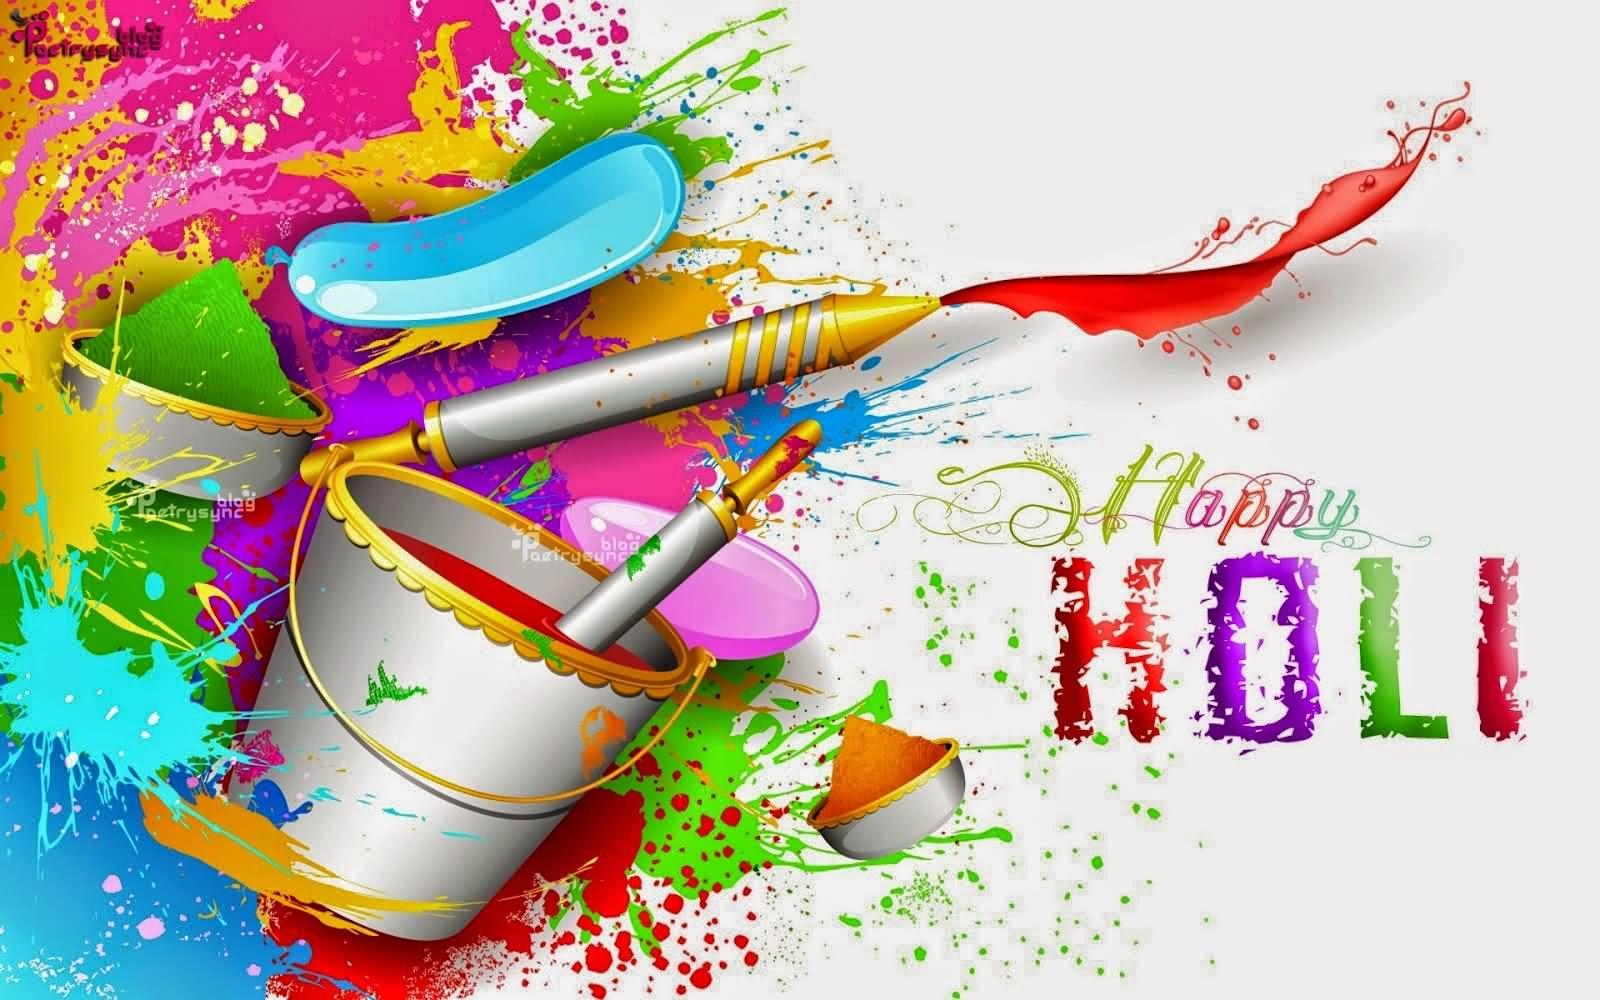 Cute and Best Loved Wallpaper and SmS: Happy Holi 2019 Special